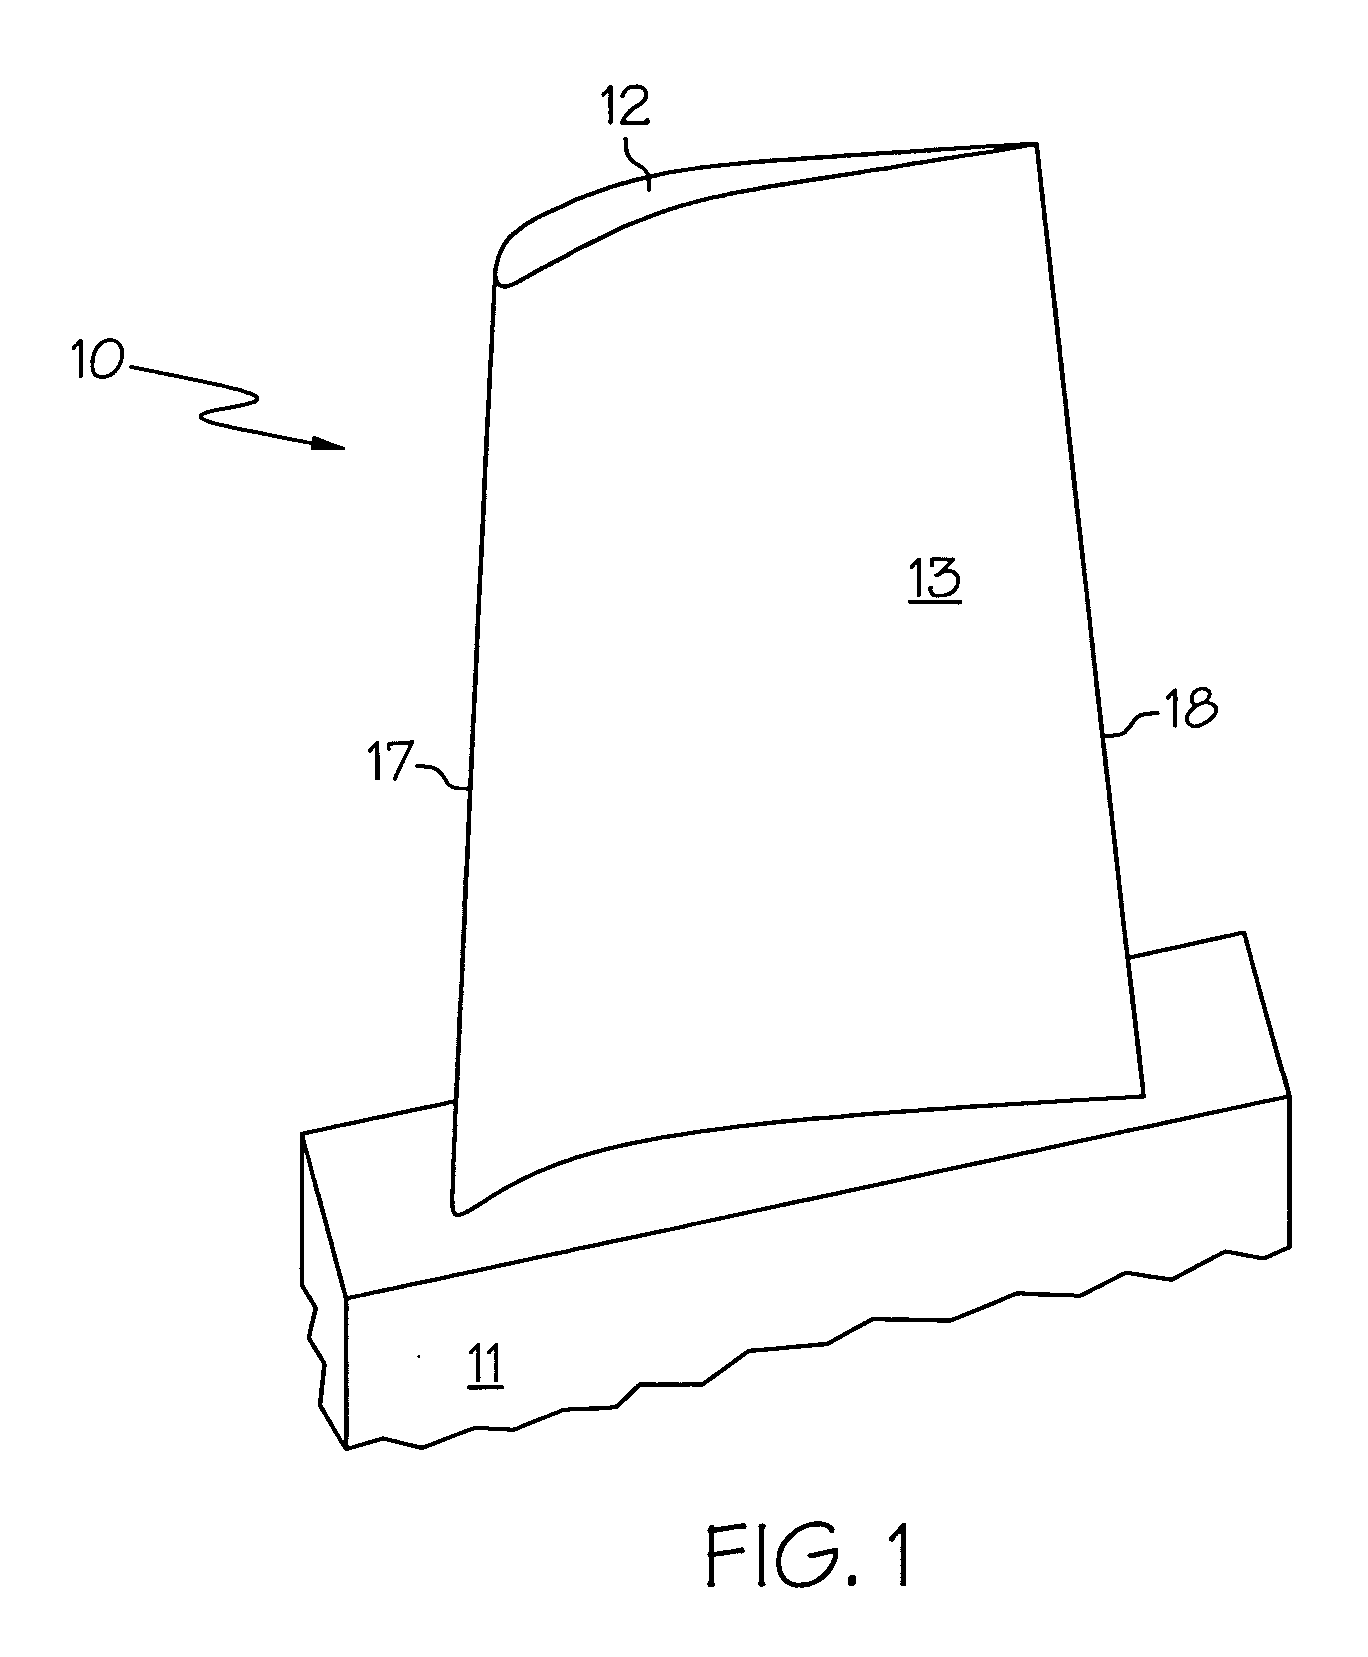 Method to restore an airfoil leading edge